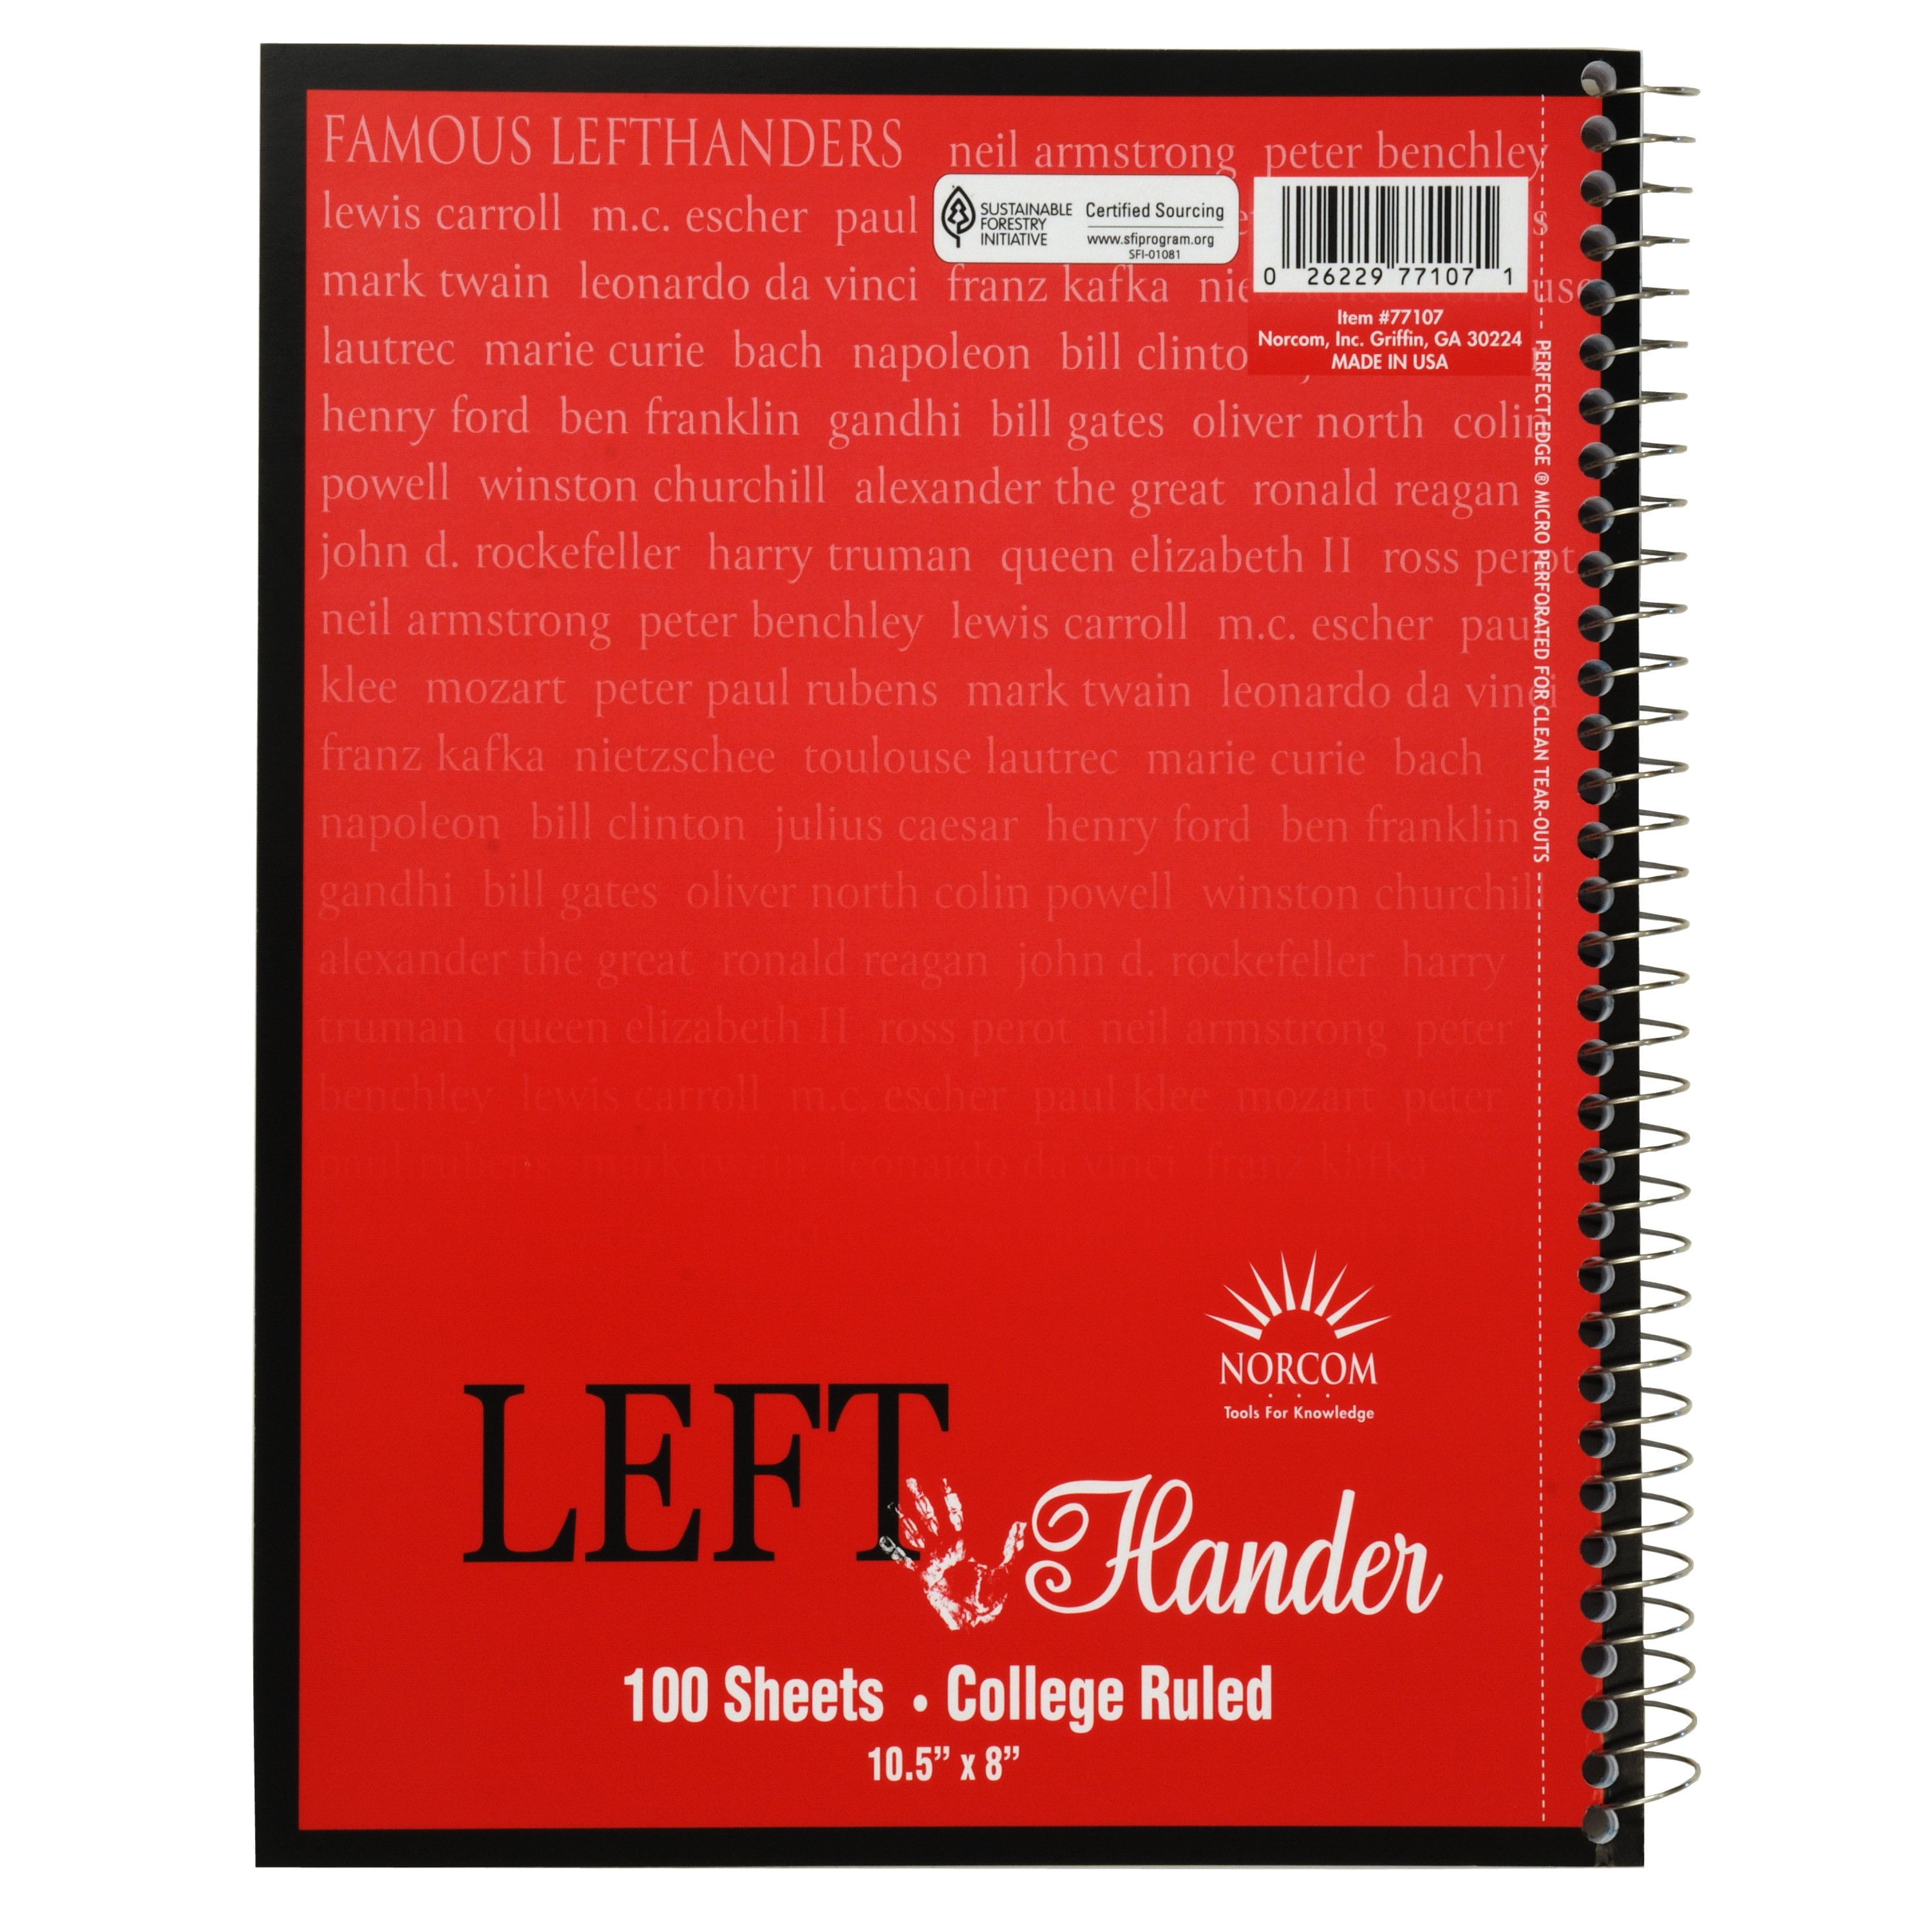 I May Be Left Handed But I'm Always Right Lefty Left Handed Gift | Spiral  Notebook